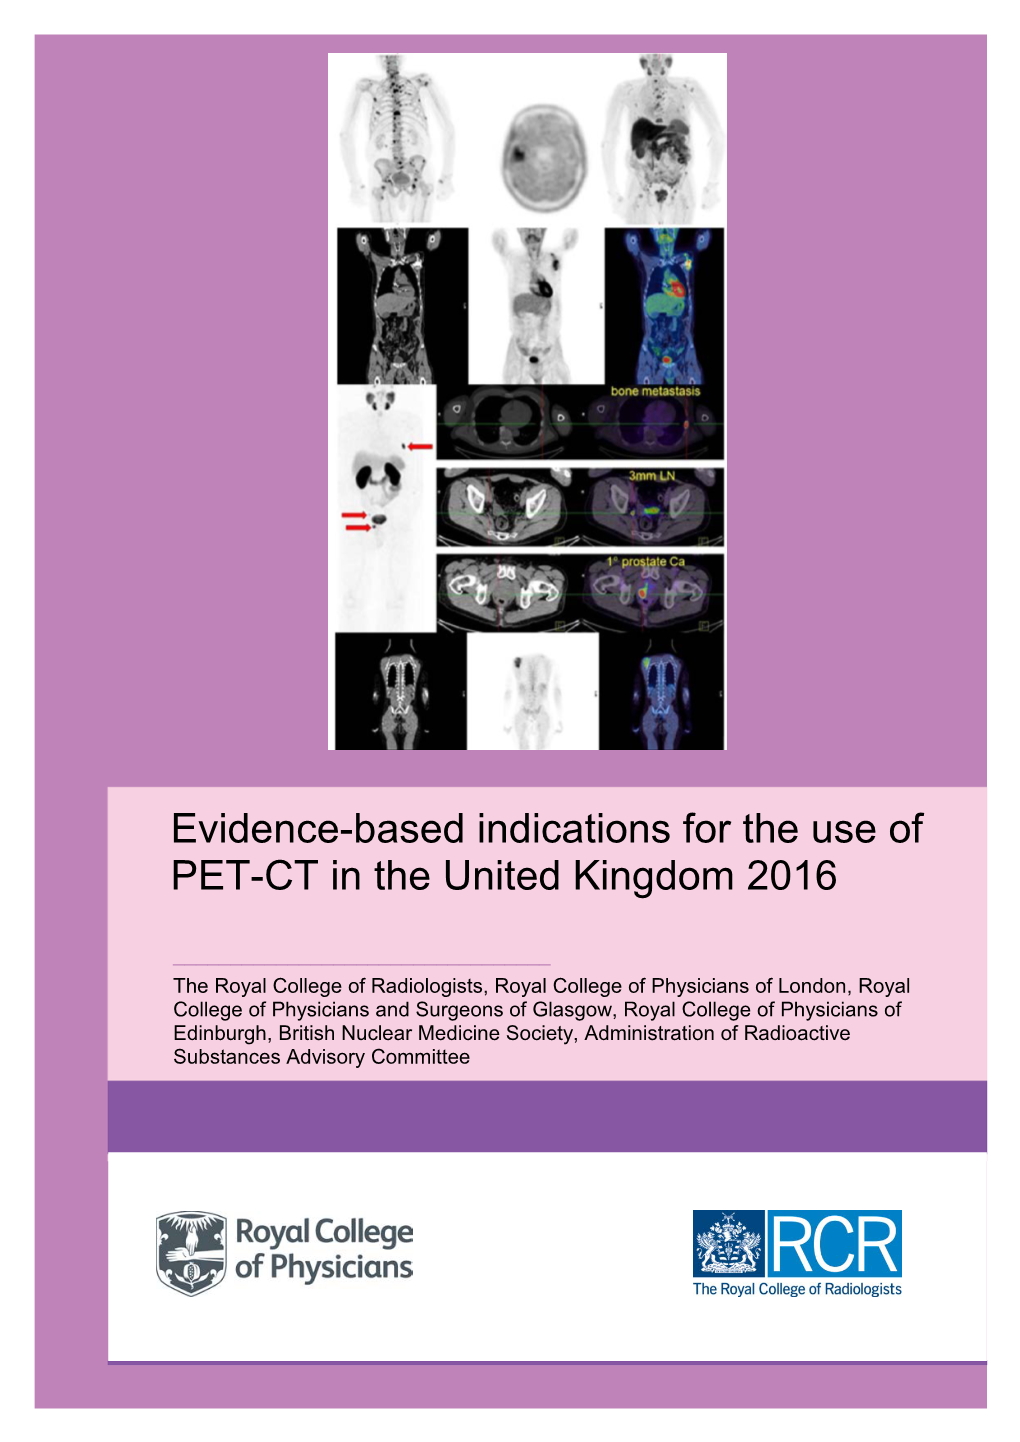 Evidence-Based Indications for the Use of PET-CT in the UK 2016